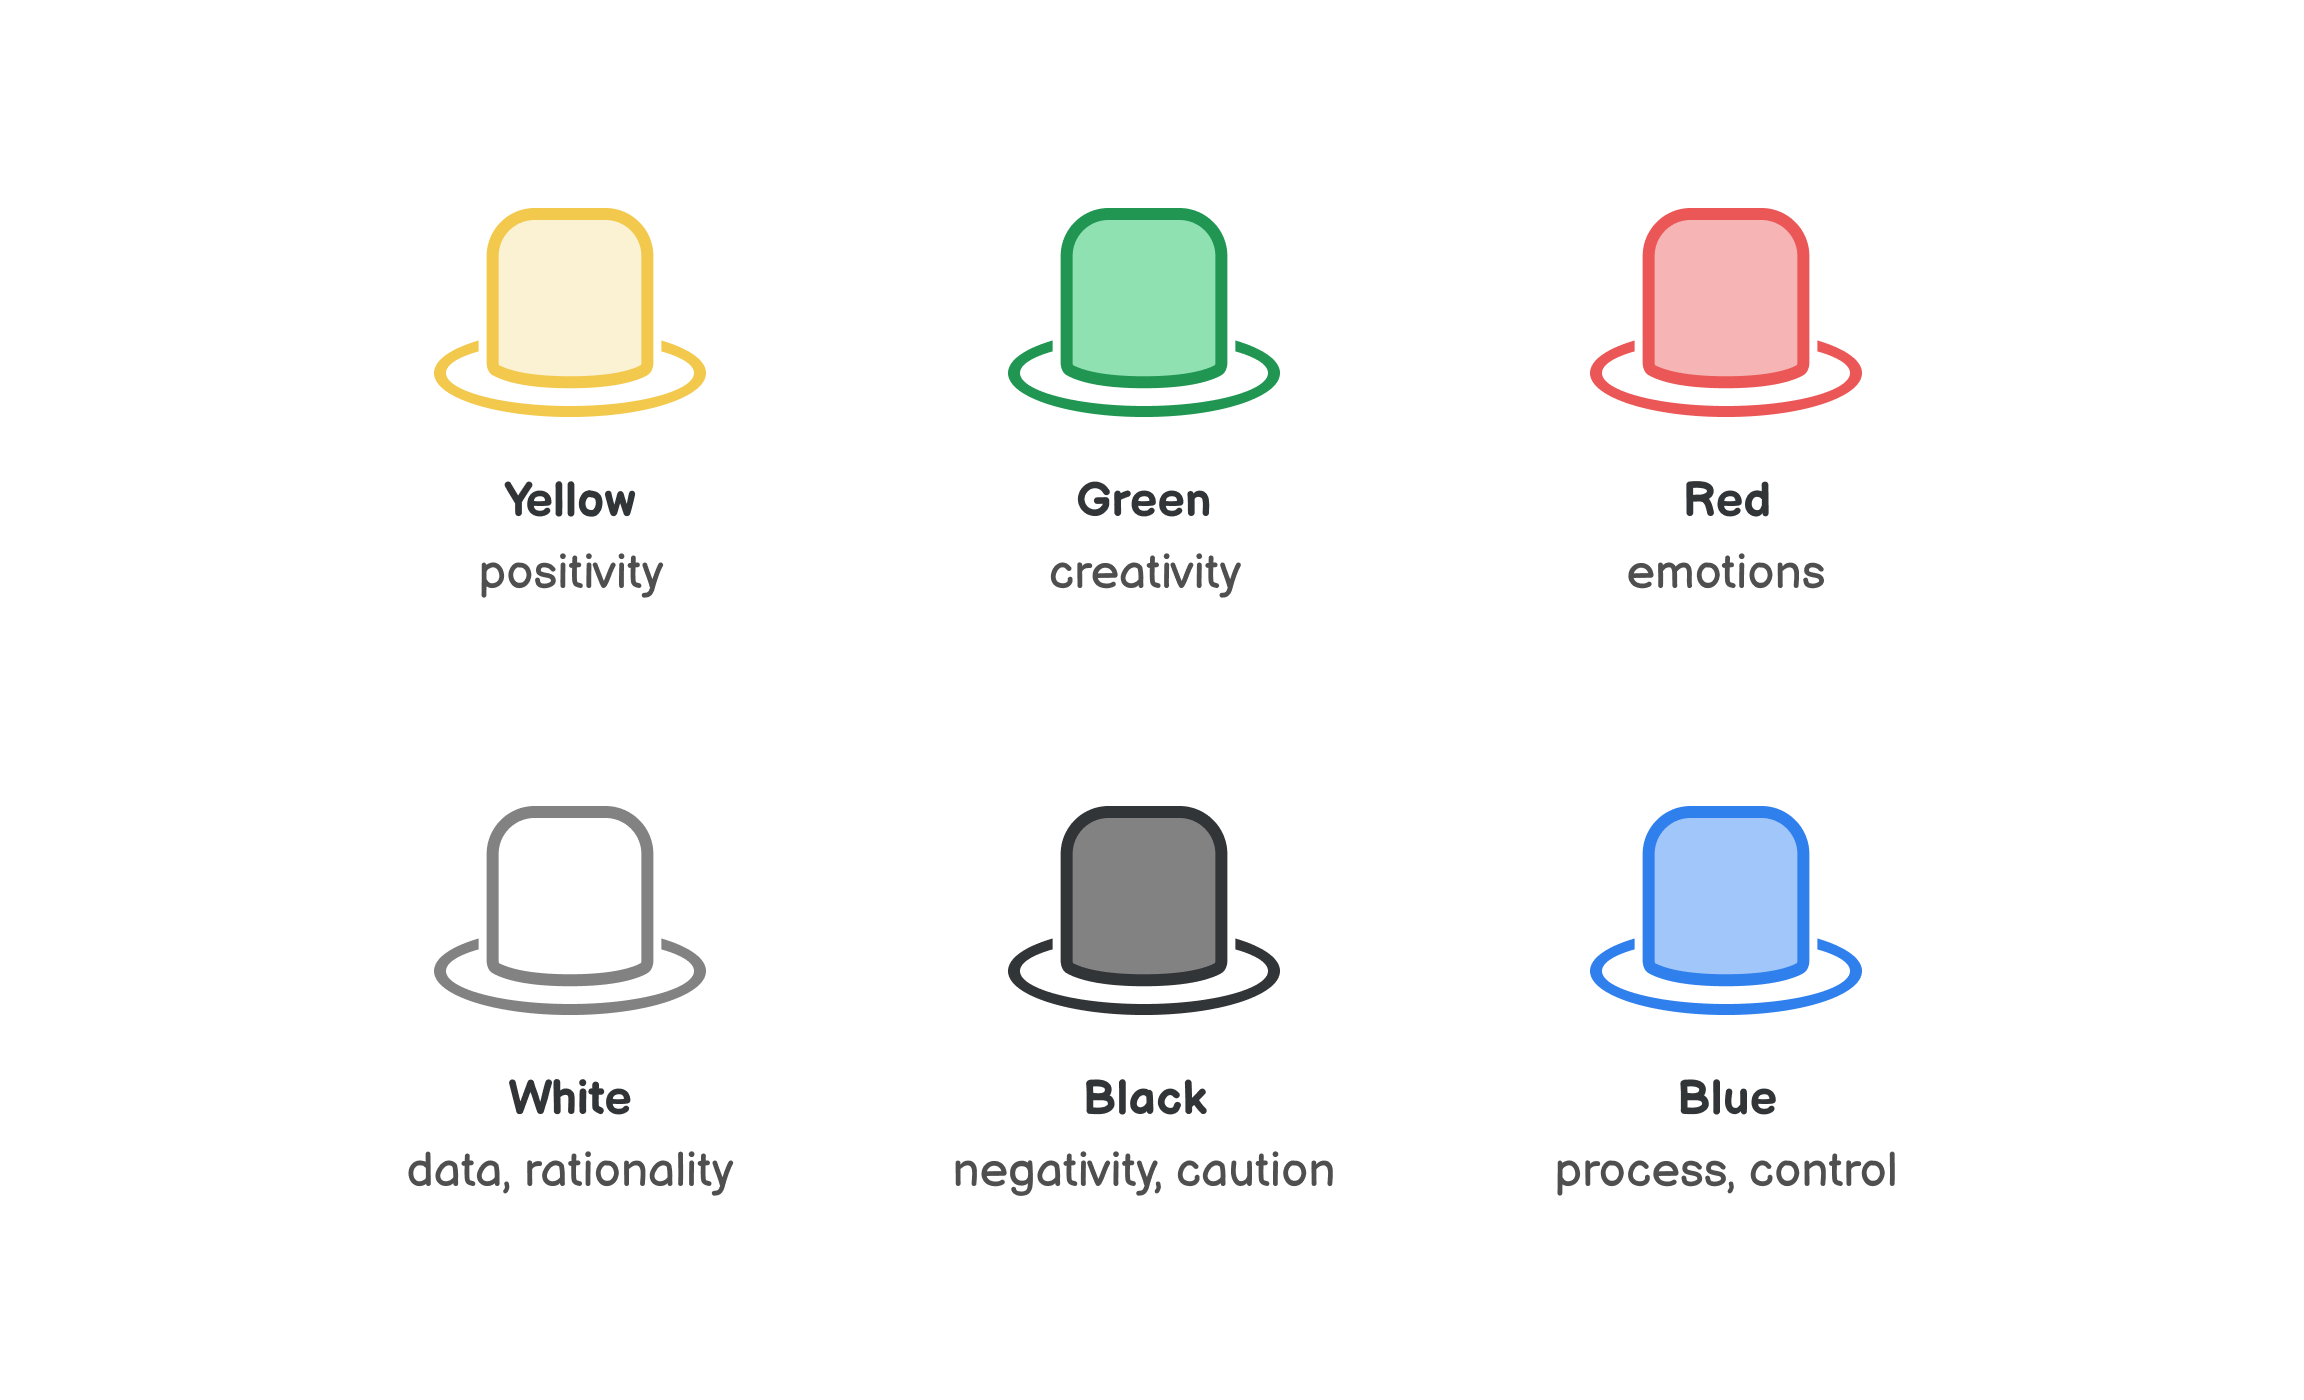 Illustration of the Six Thinking Hats: Yellow for positivity, Green for creativity, Red for emotions, White for data, Black for negativity and Blue for control.